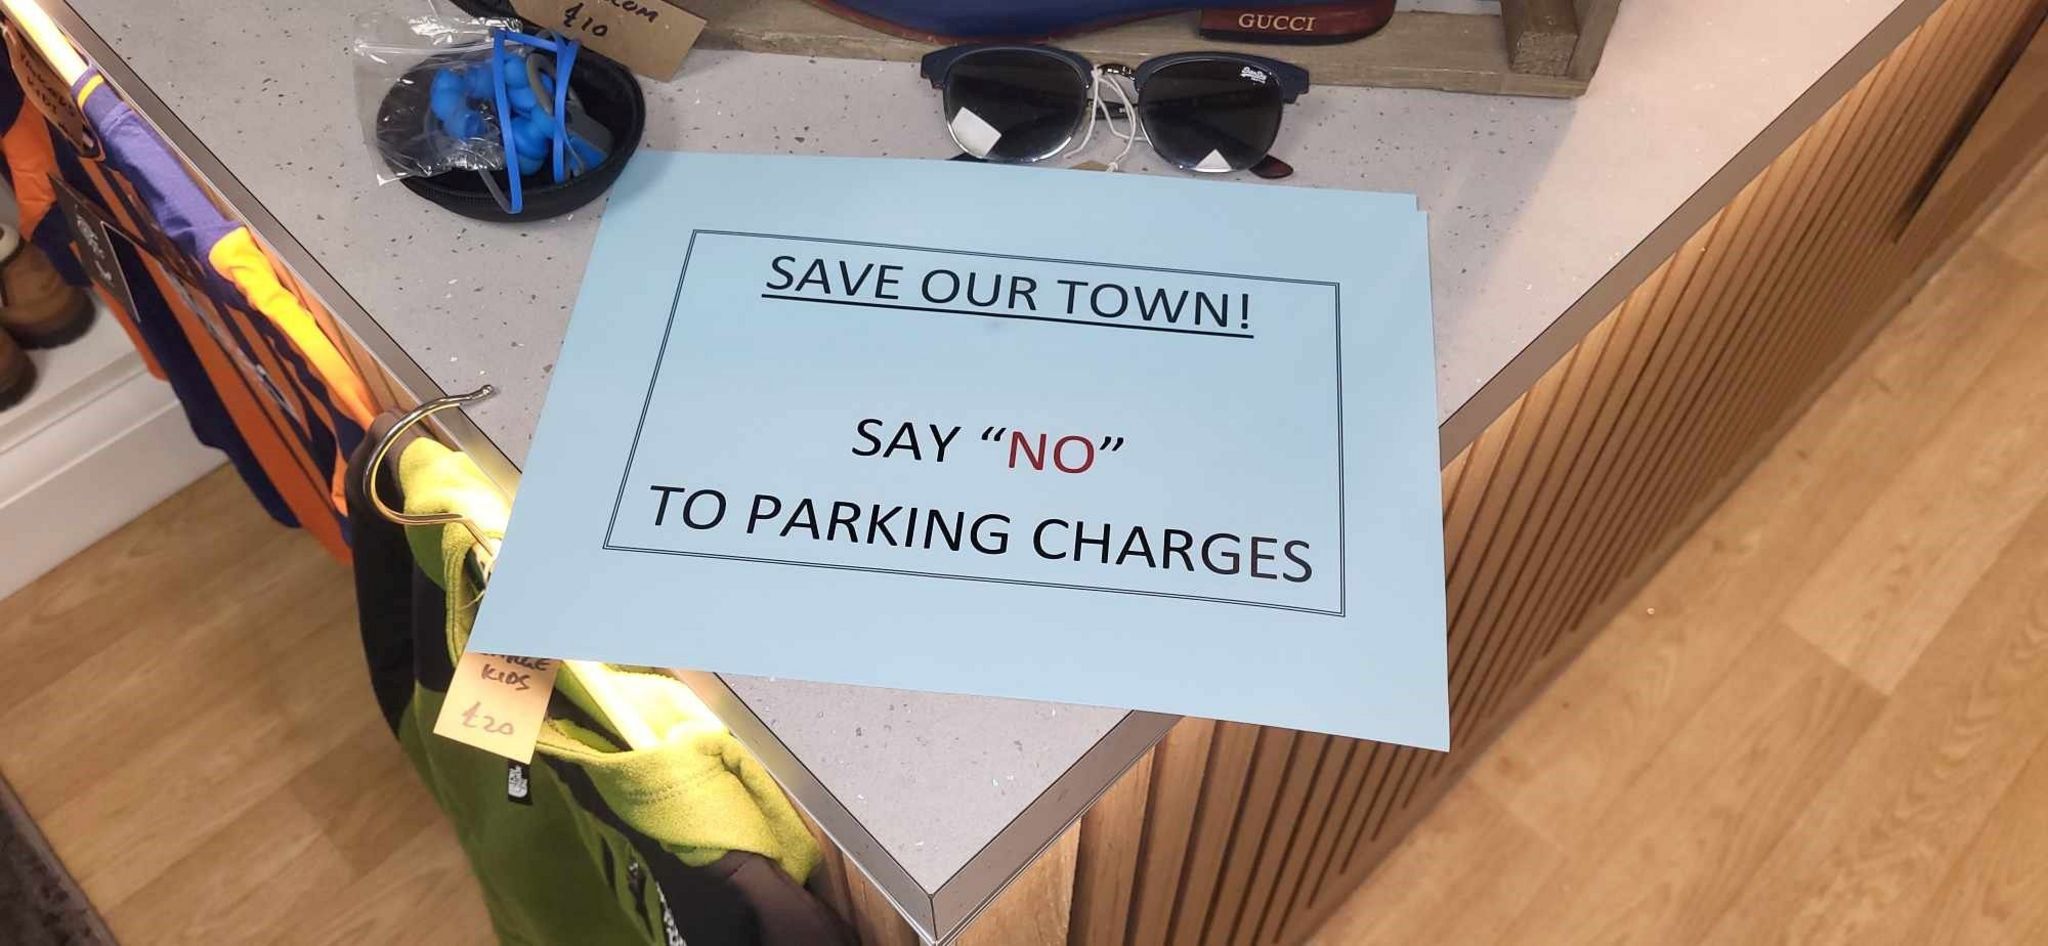 Businesses fear parking charges could ‘ruin’ town